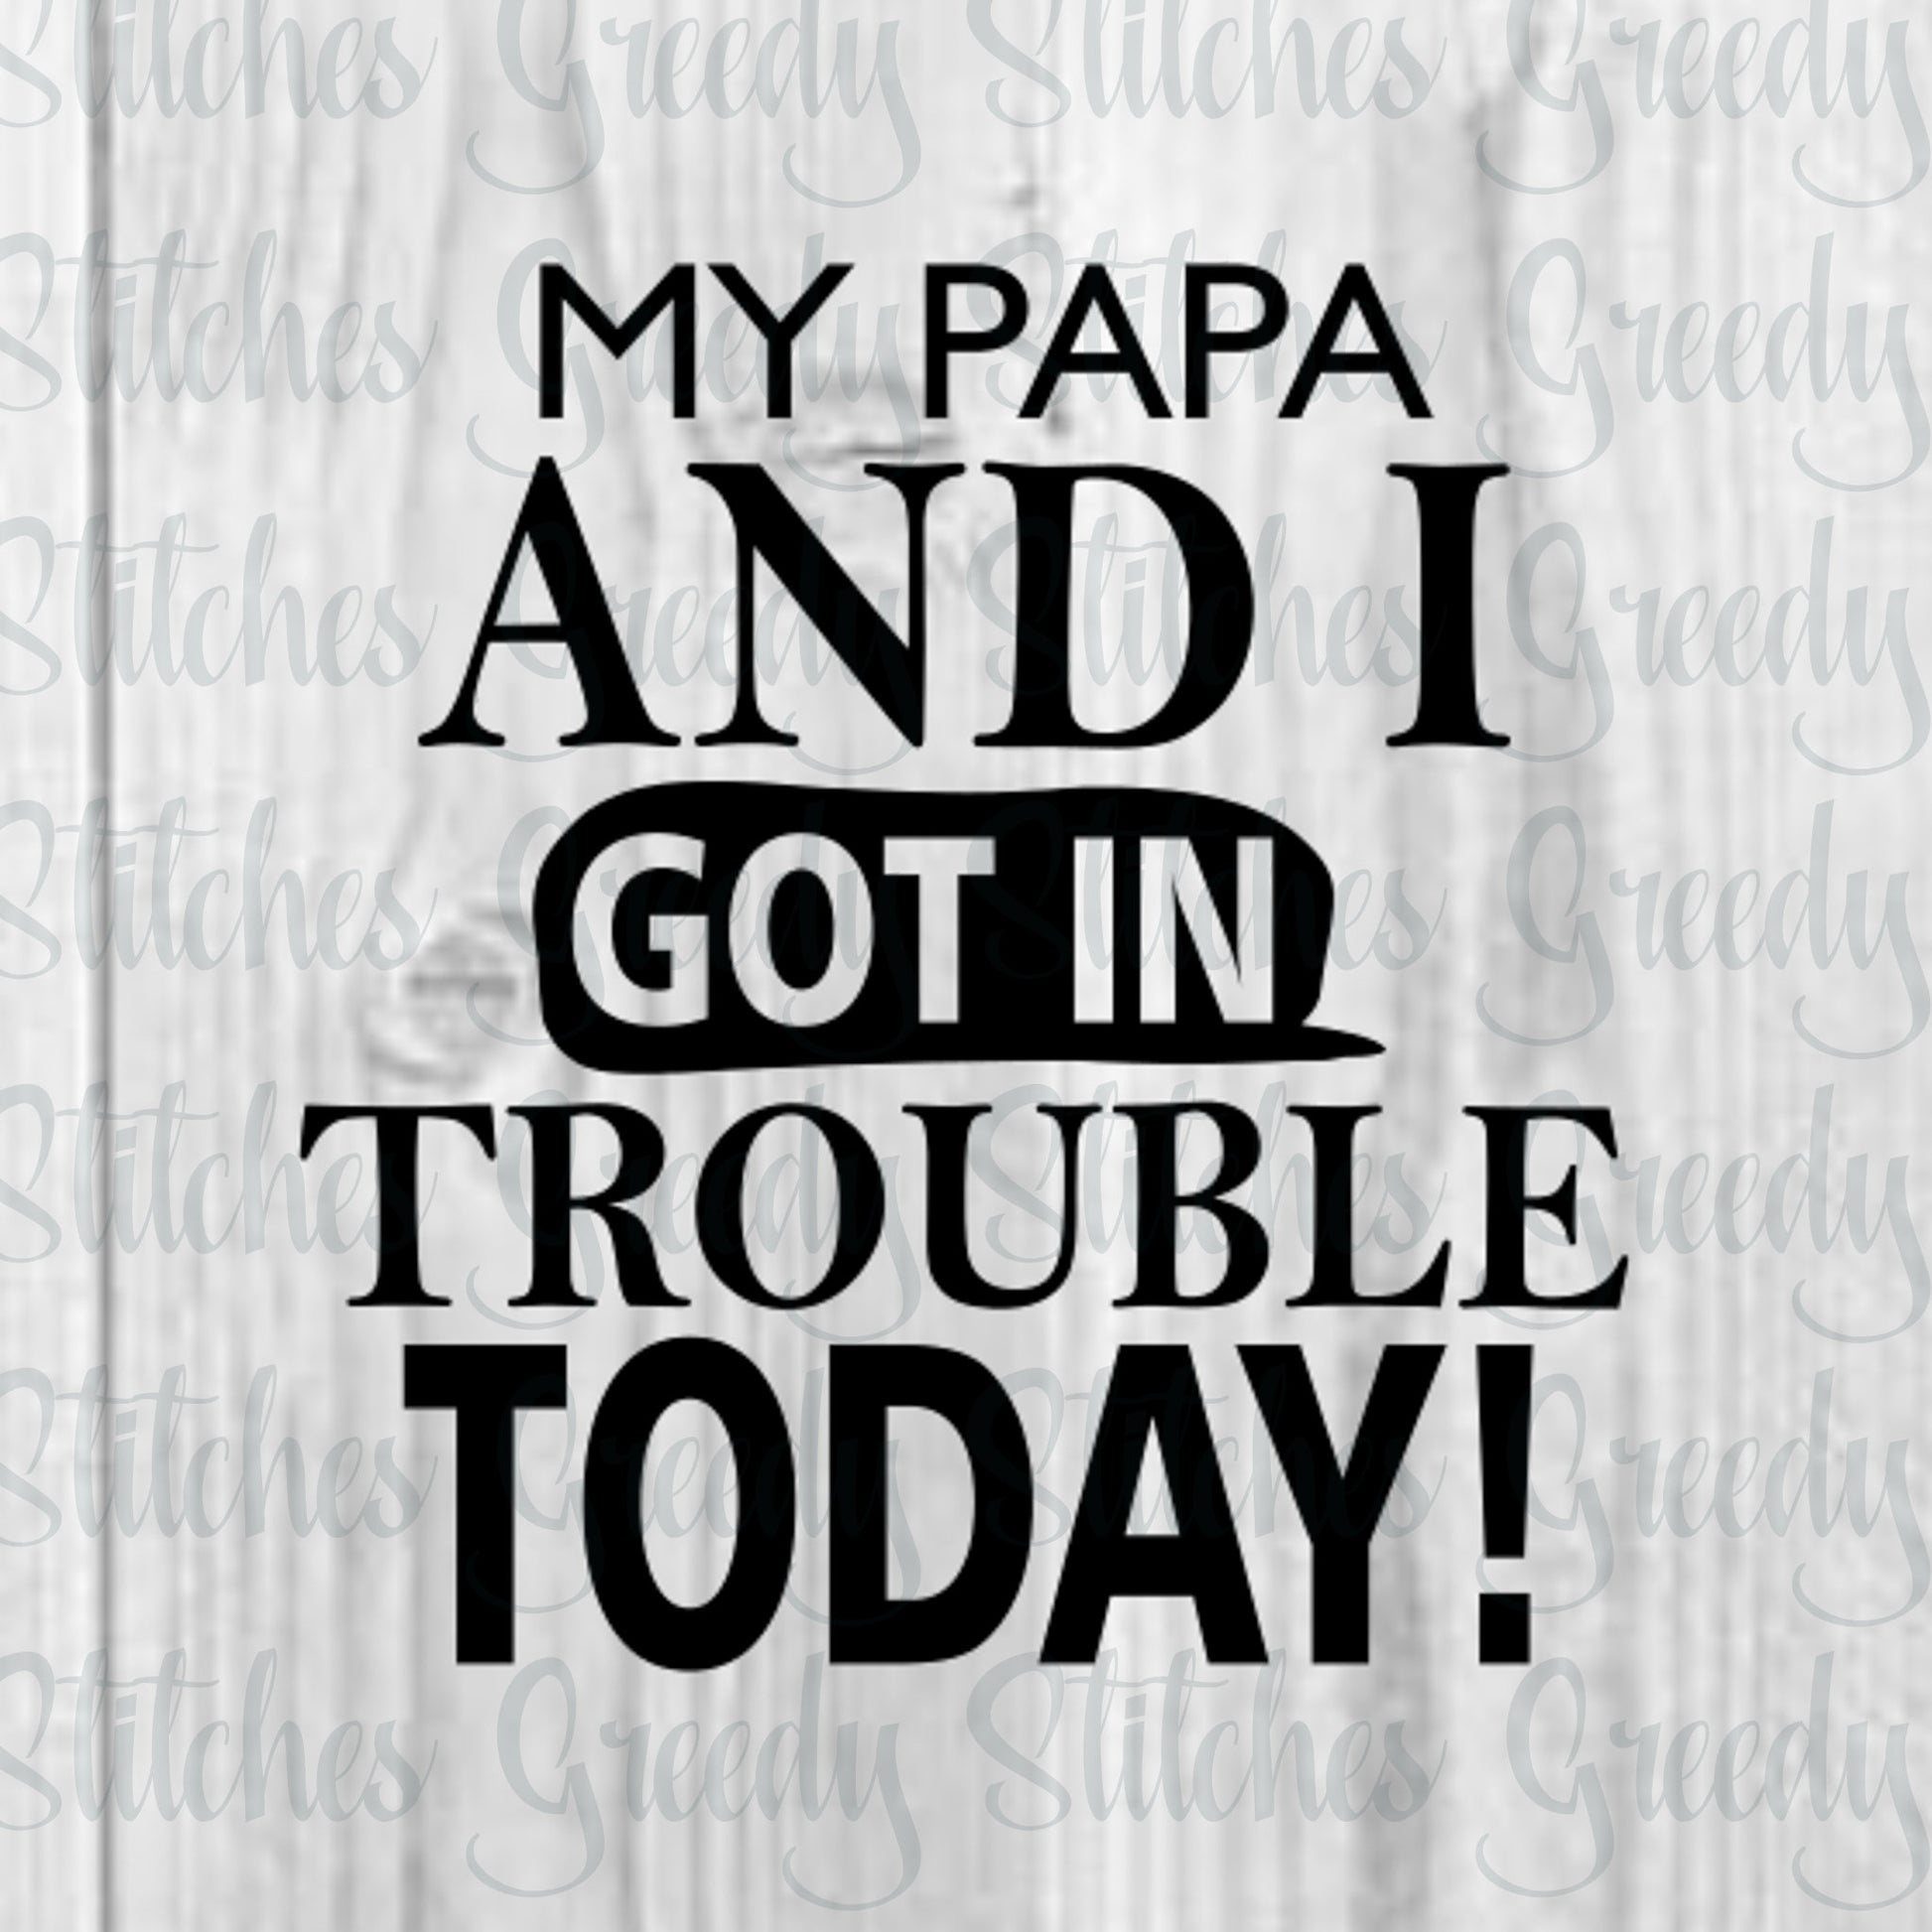 Father&#39;s Day | My Papa And I Got In Trouble Today! svg, dxf, eps, png. Papa SvG | Grandsons SvG | Instant Download Cut Files.